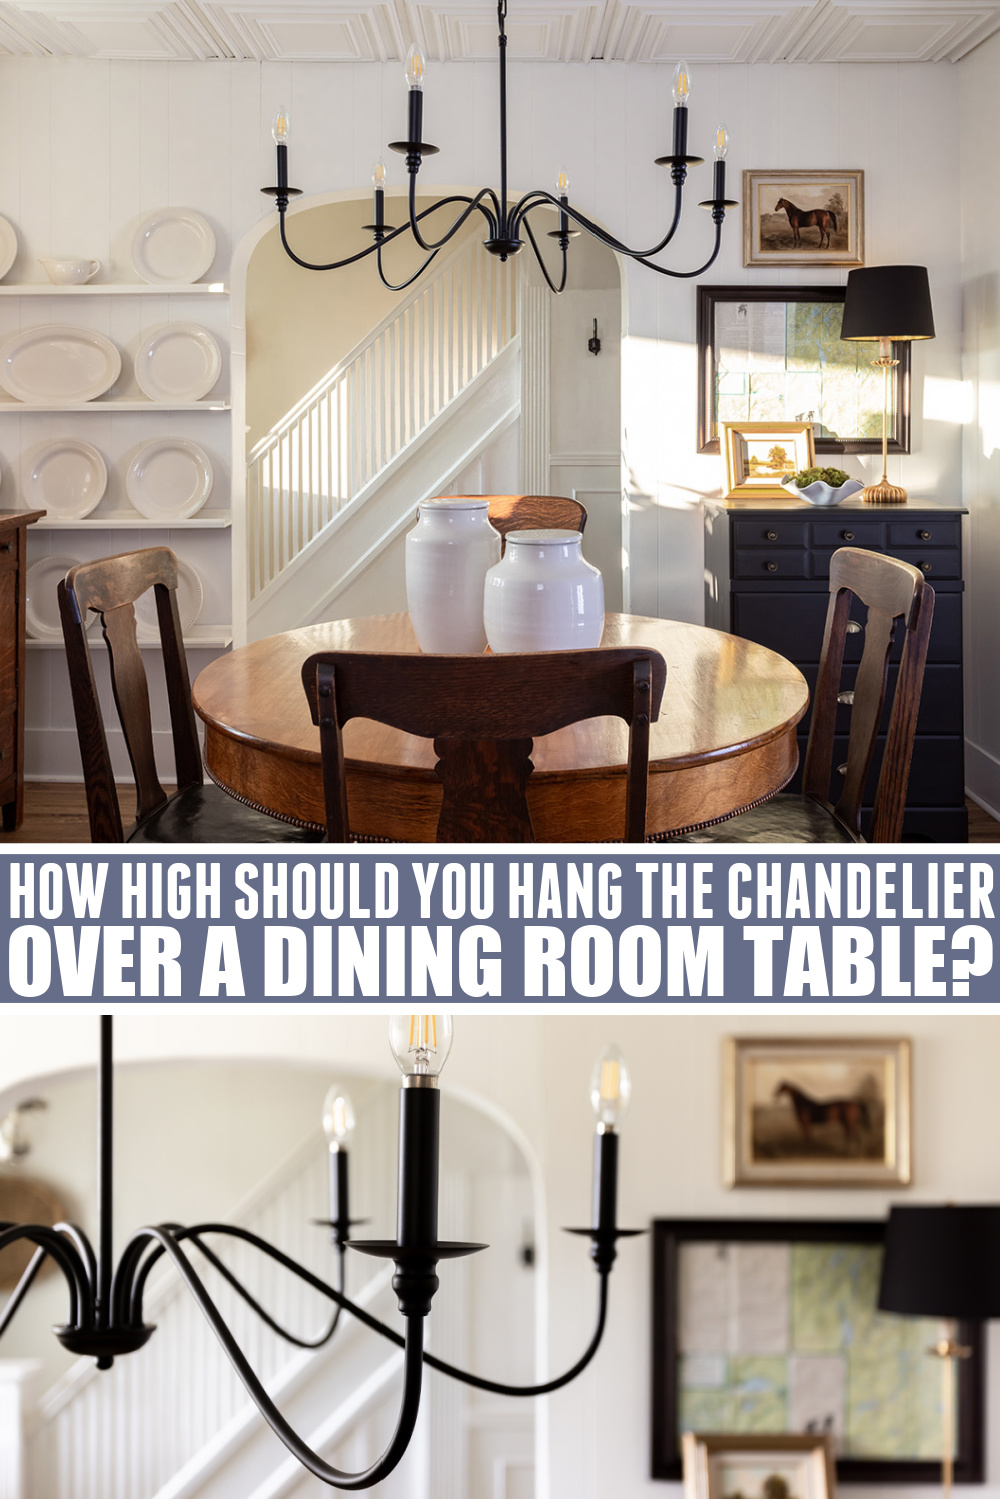 How high to hang a chandelier over a table.